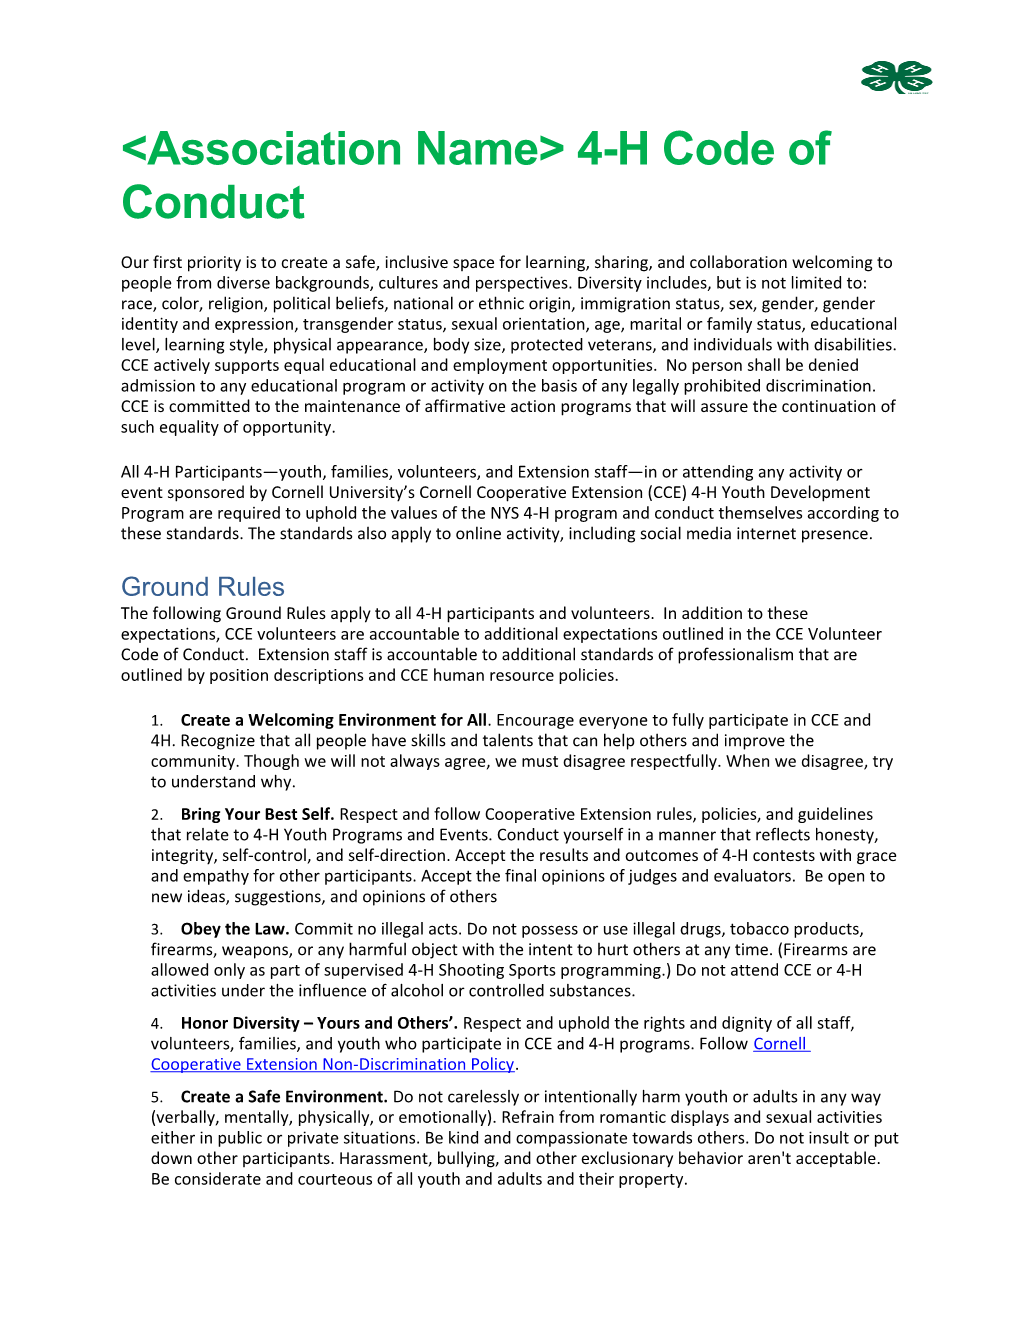 &lt;Association Name&gt; 4-H Code of Conduct